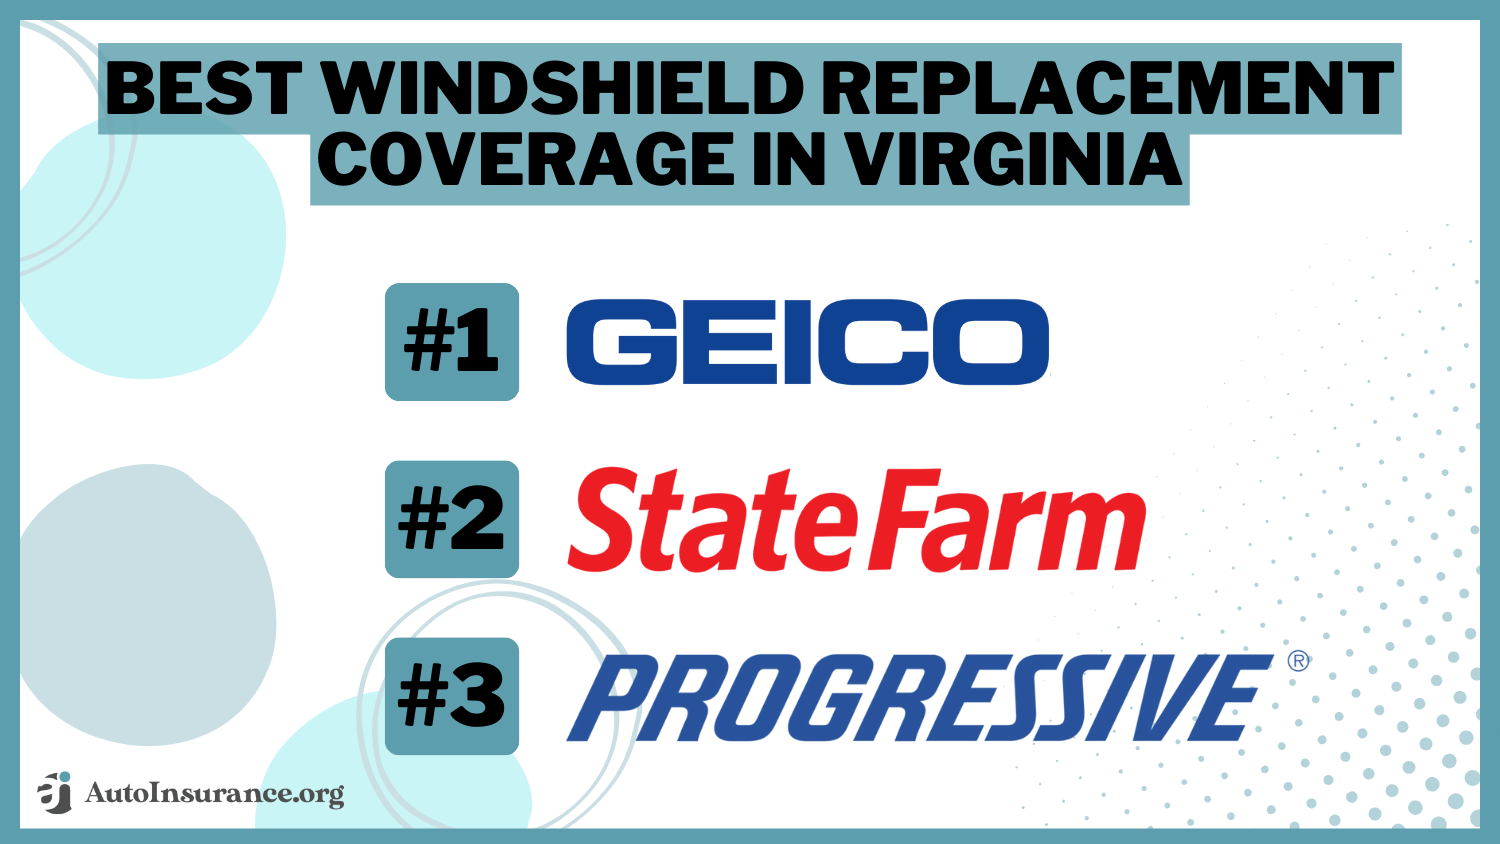 best windshield replacement coverage in Virginia: Geico, State Farm, Progressive